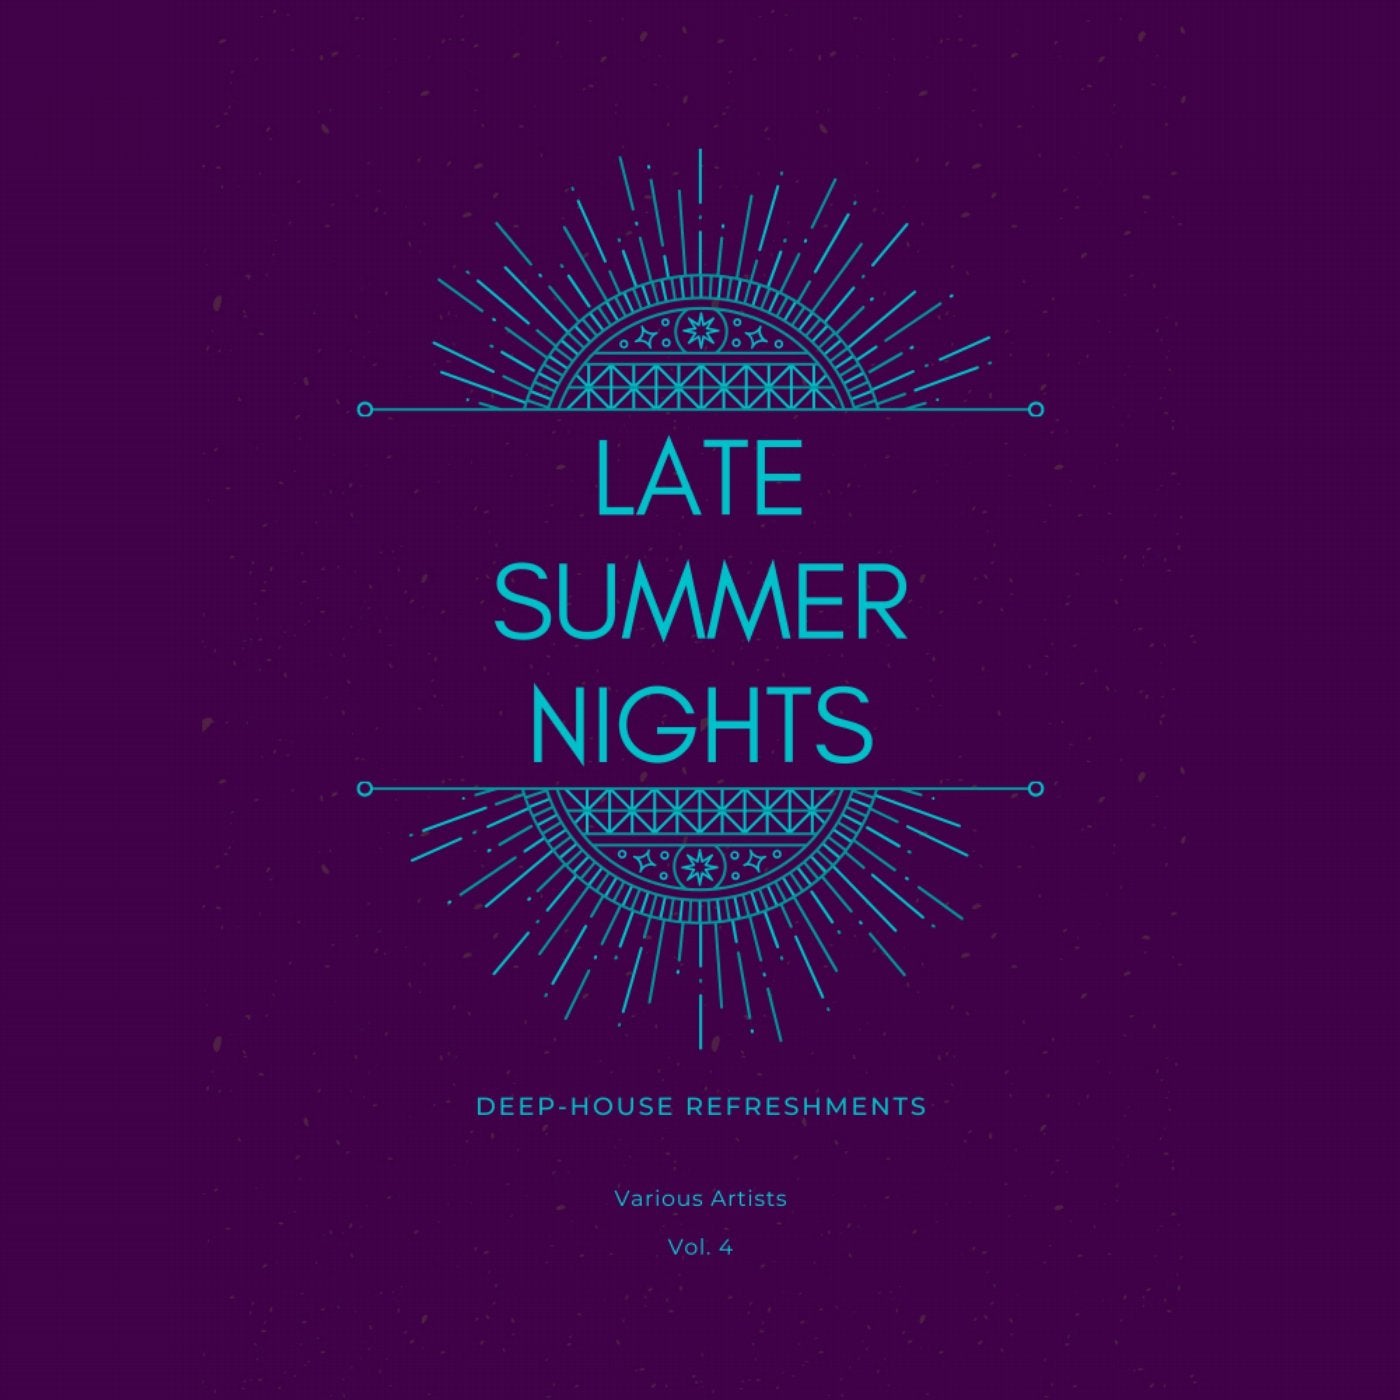 Late Summer Nights (Deep-House Refreshments), Vol. 4